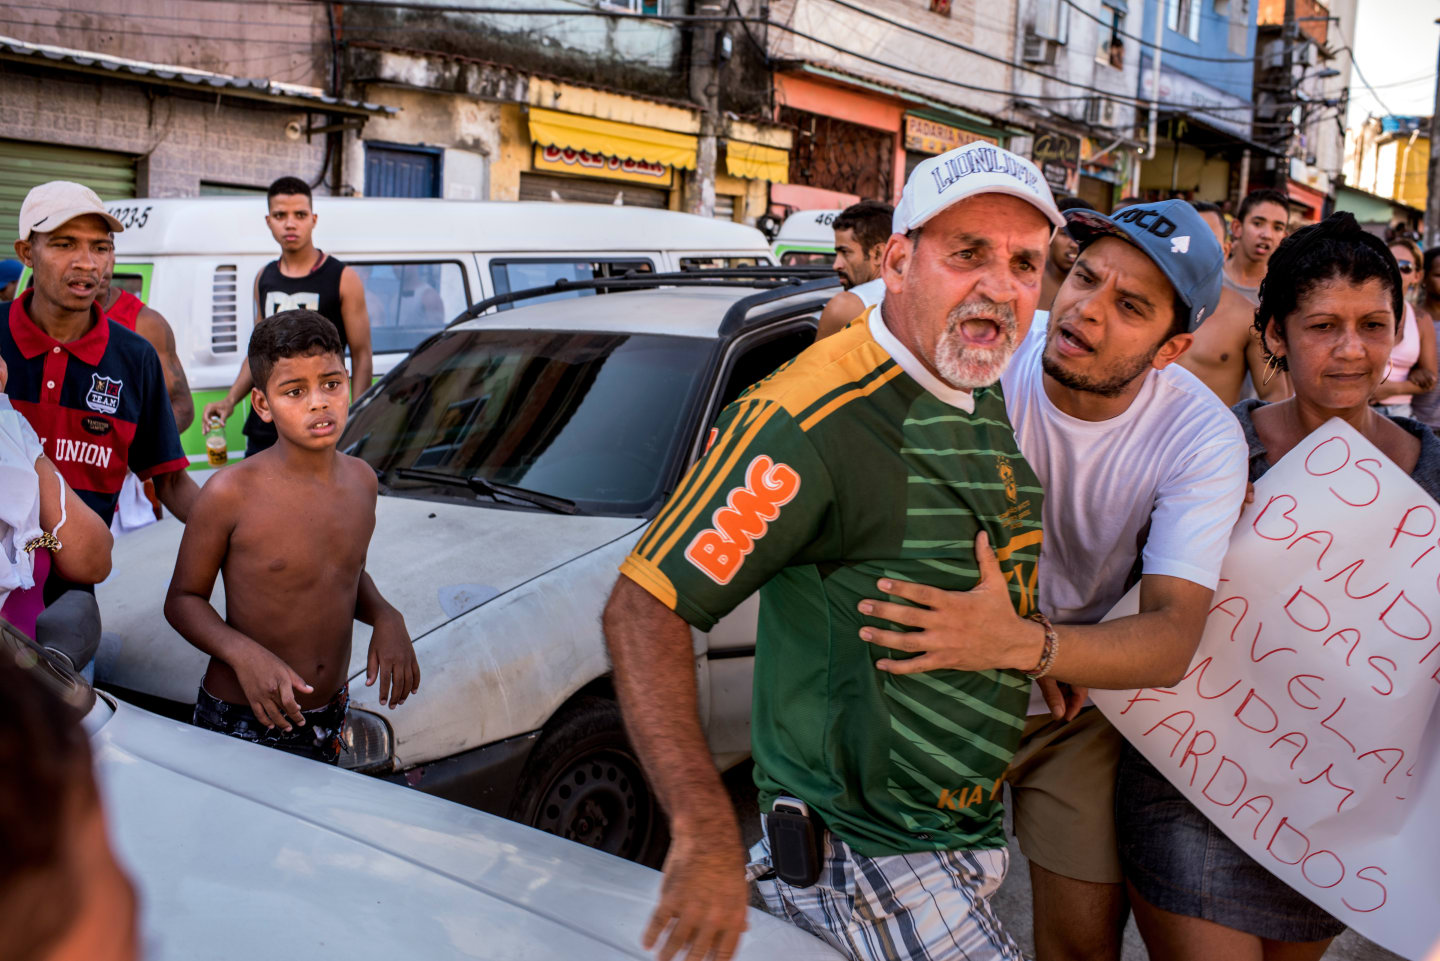 These Poignant Photographs Document Real Life In Rio De Janeiro